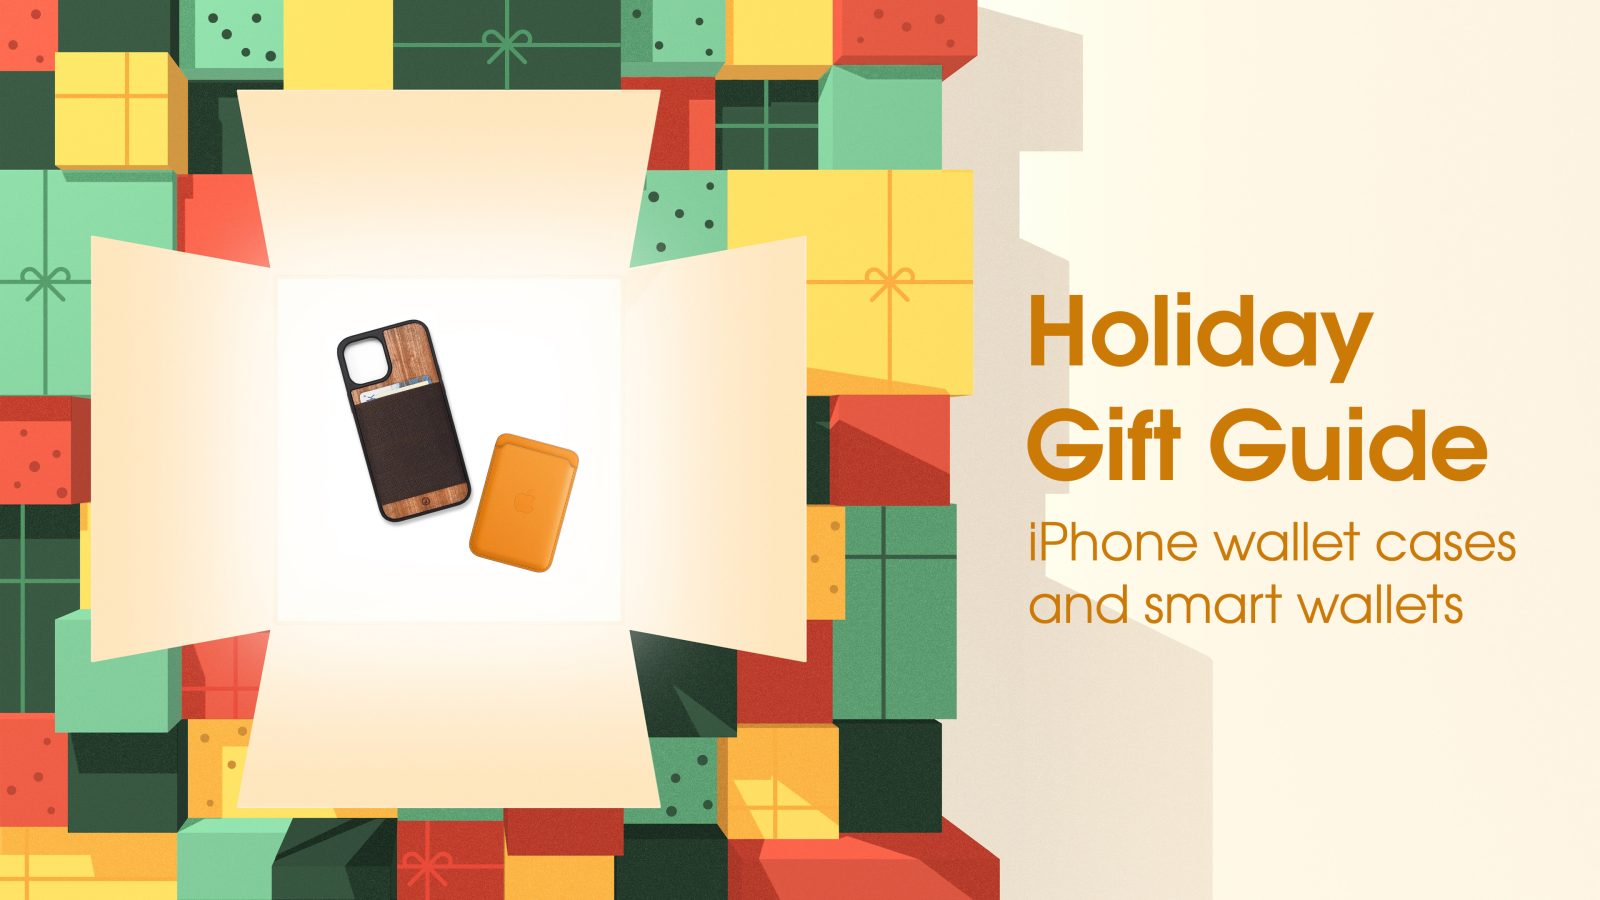 iPhone wallet gift guide: Great options everyone - 9to5Mac